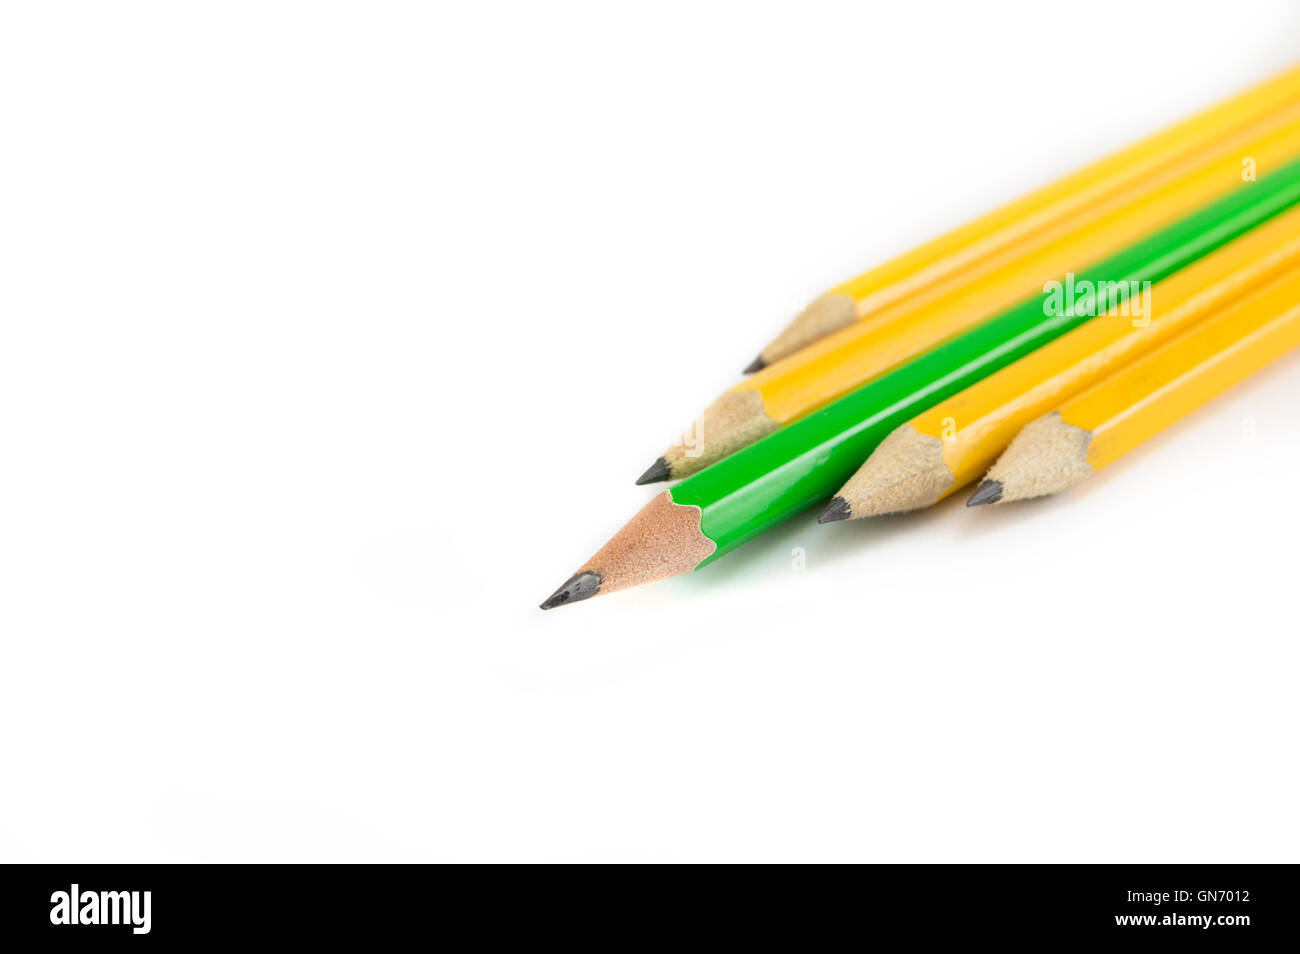 Five pencils in a group on white background Stock Photo